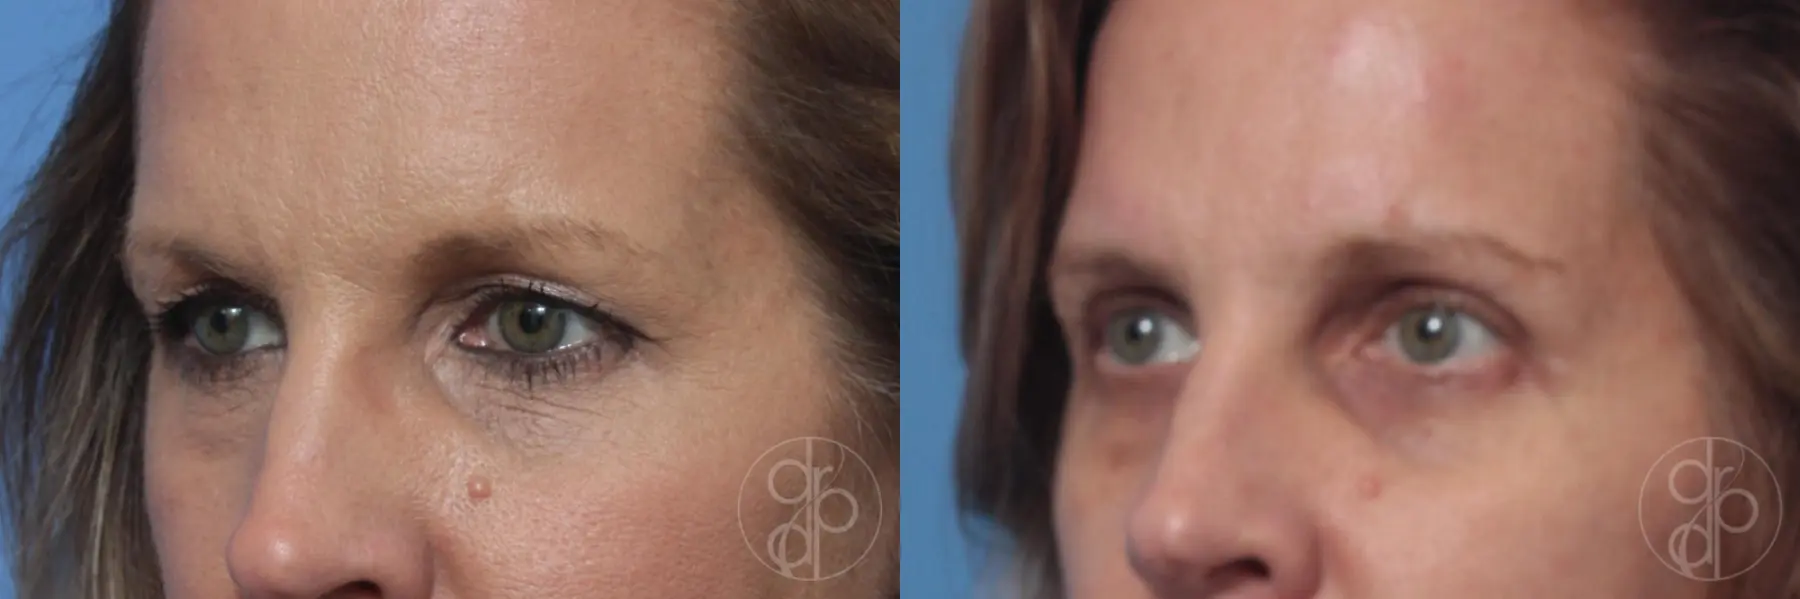 patient 10511 blepharoplasty before and after result - Before and After 2